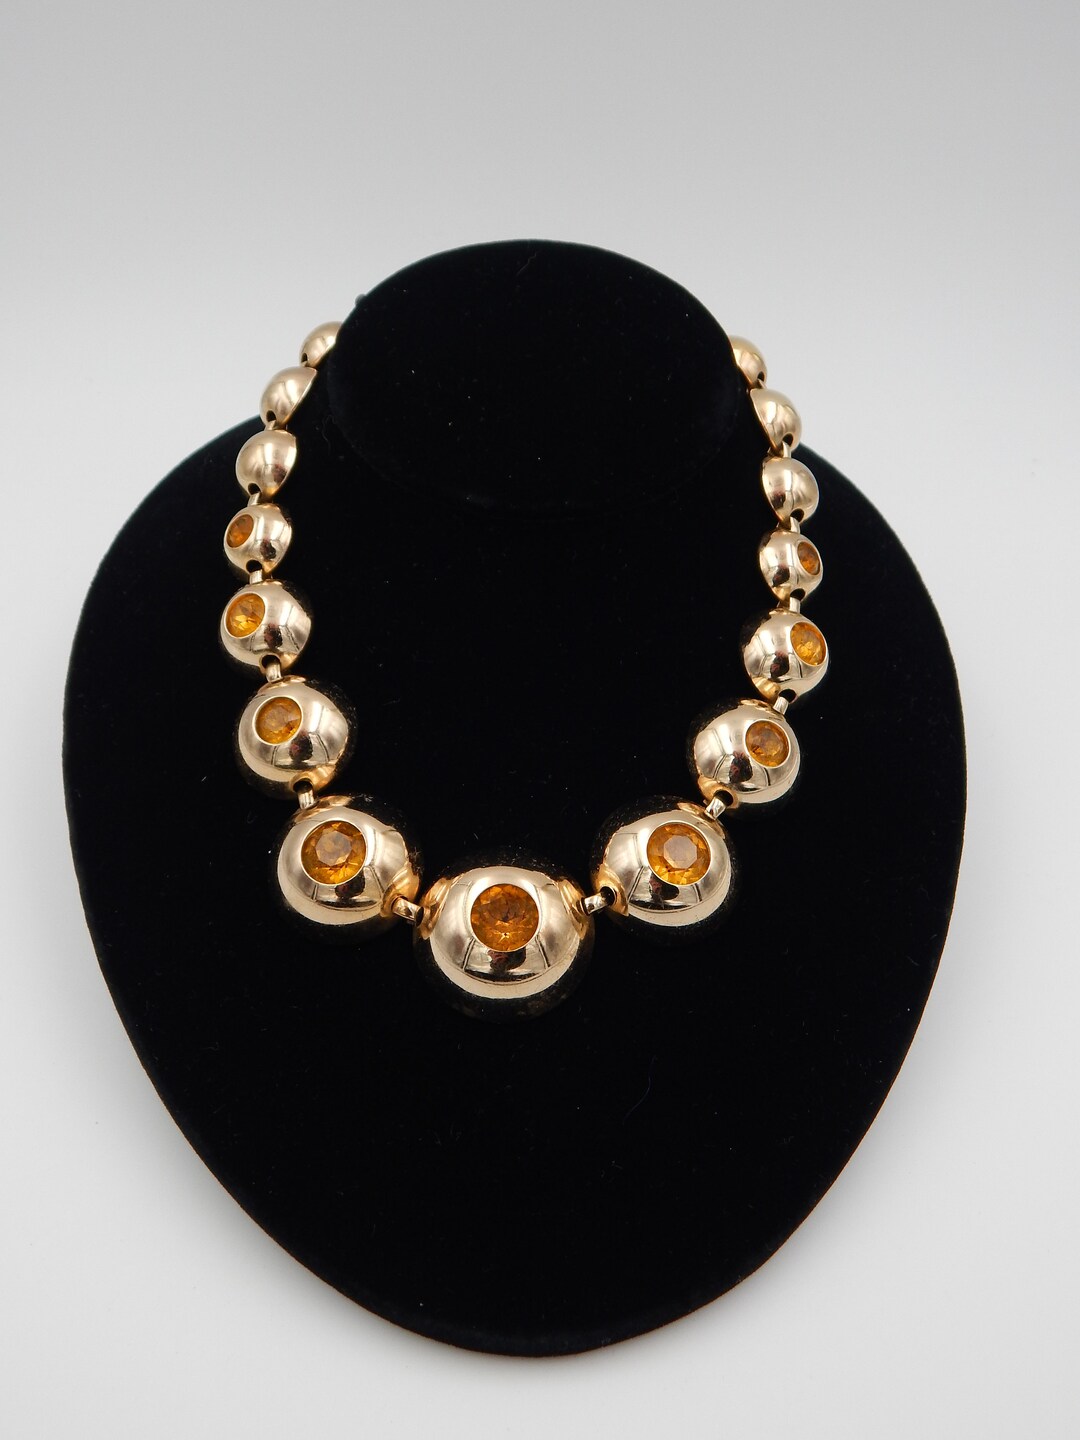 NAPIER Rhinestone Necklace Domed Links Yellow Brown - Etsy